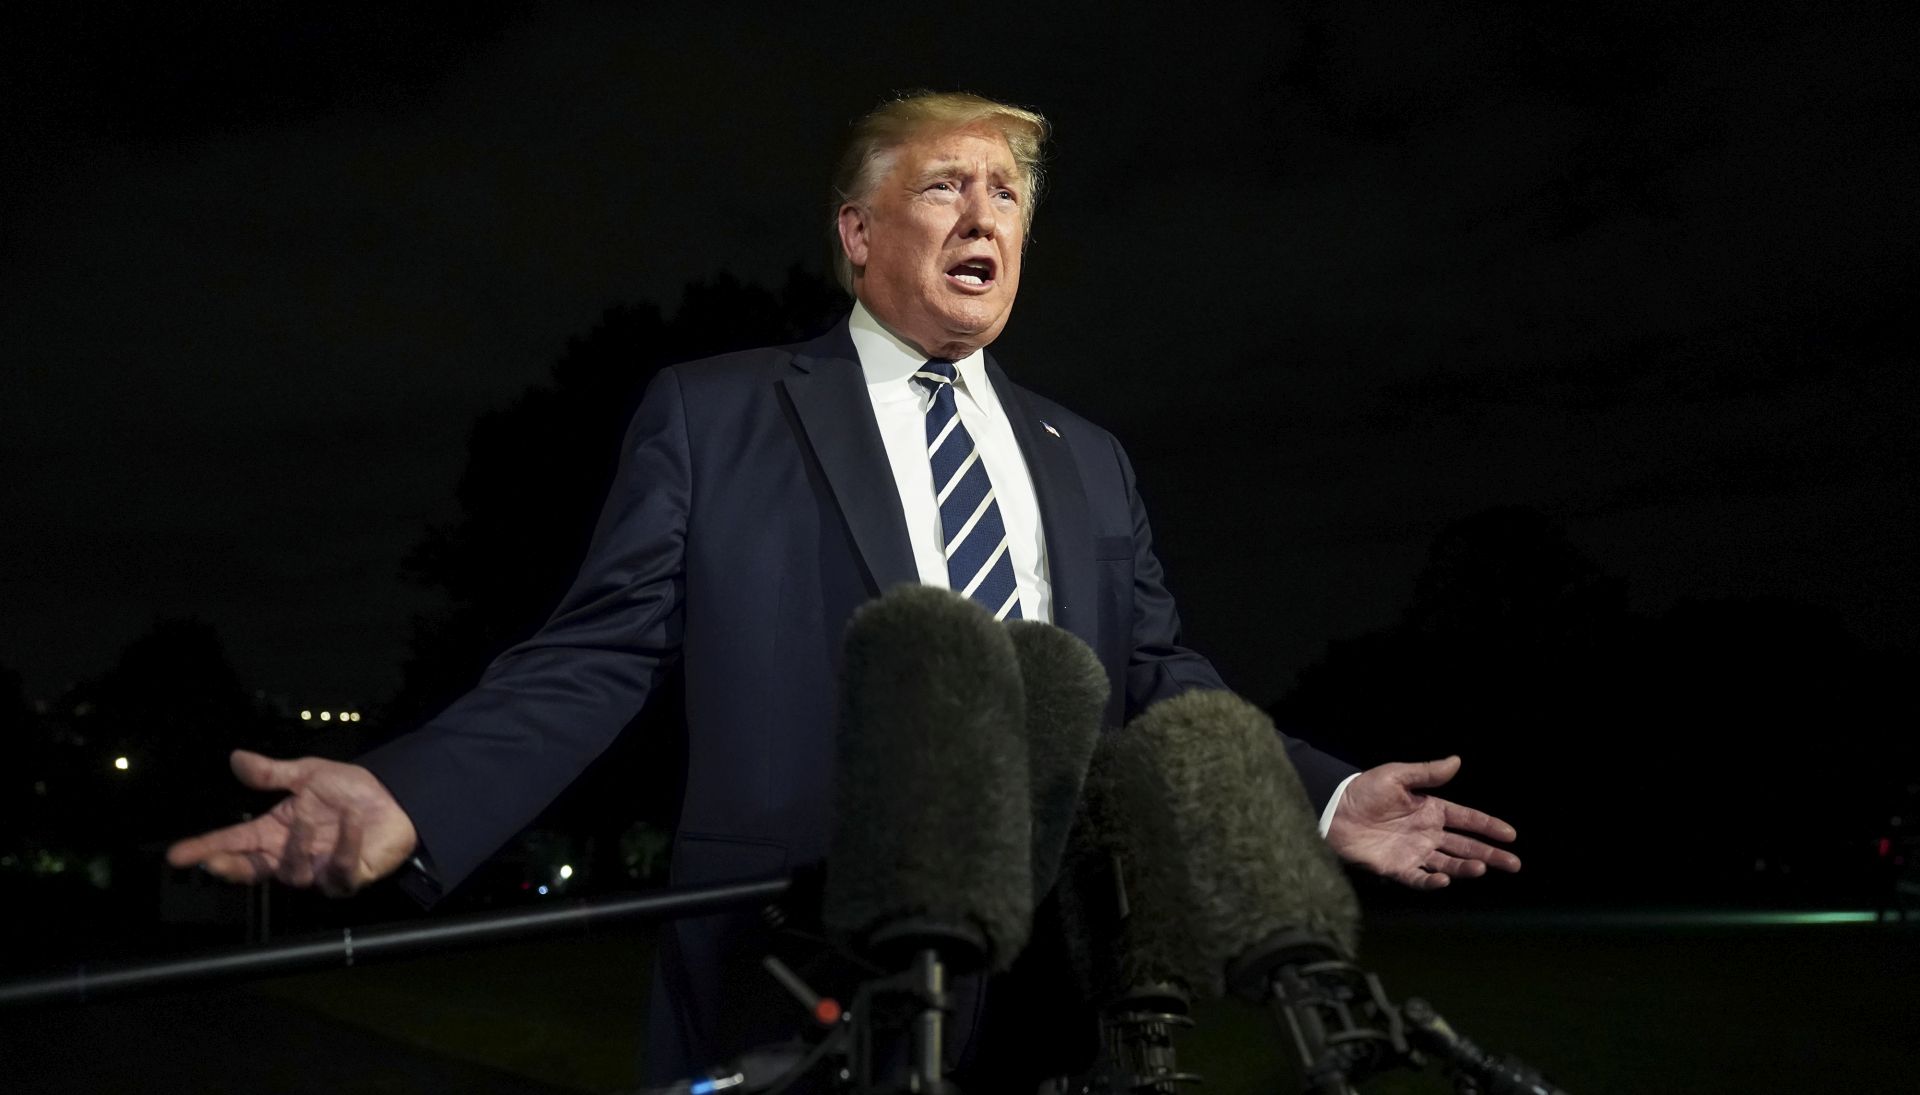 epa07789406 President of the United States Donald J. Trump speaks with members of the media as he departs the White House, en route to Joint Base Andrews, in Washington, DC, USA, 23 August 2019. Trump is traveling to the 45th G7 summit in Biarritz, France.  EPA/LEIGH VOGEL / POOL